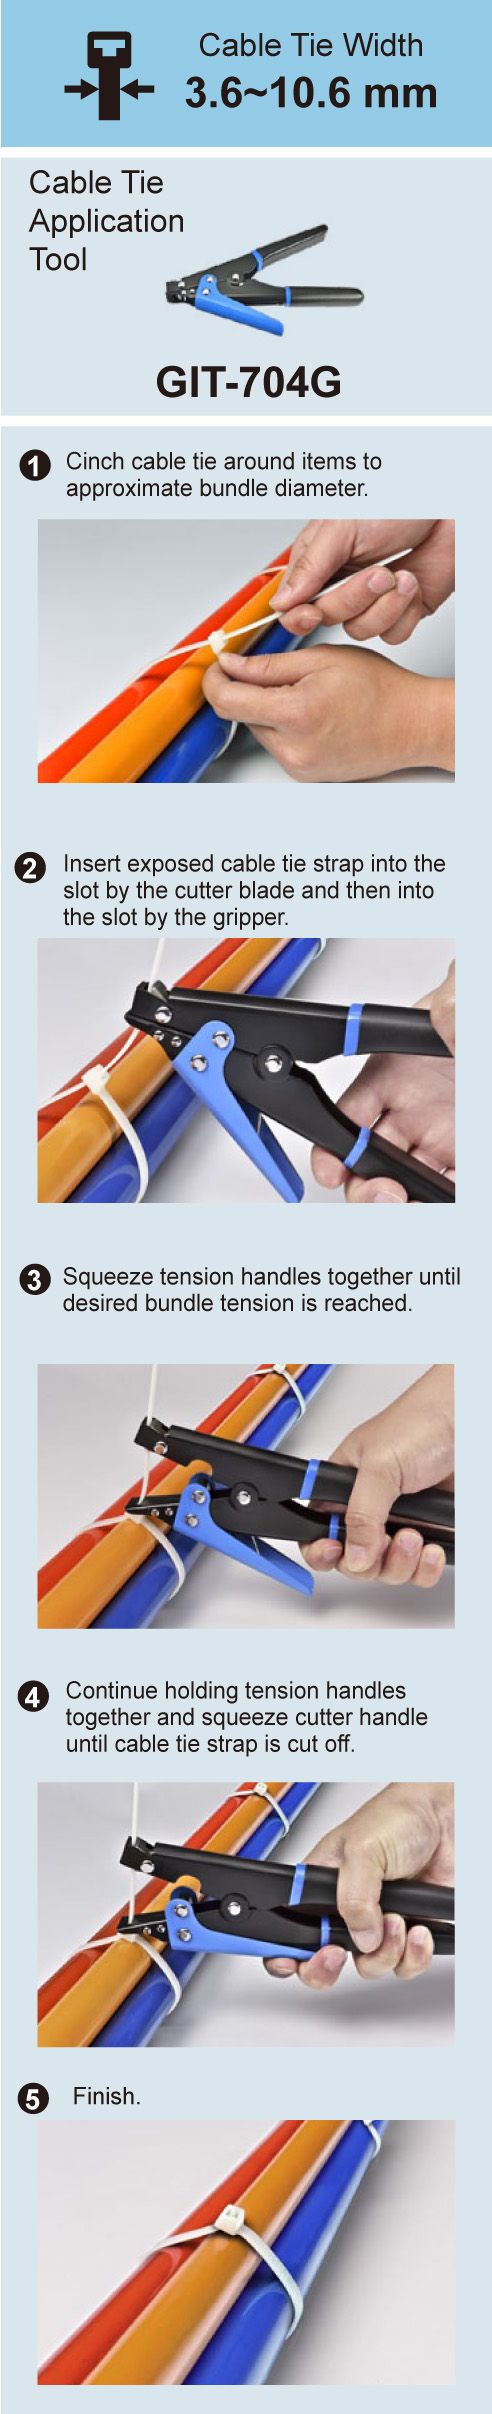 Operating Instructions of Plastic Cable Ties with GIT-704G